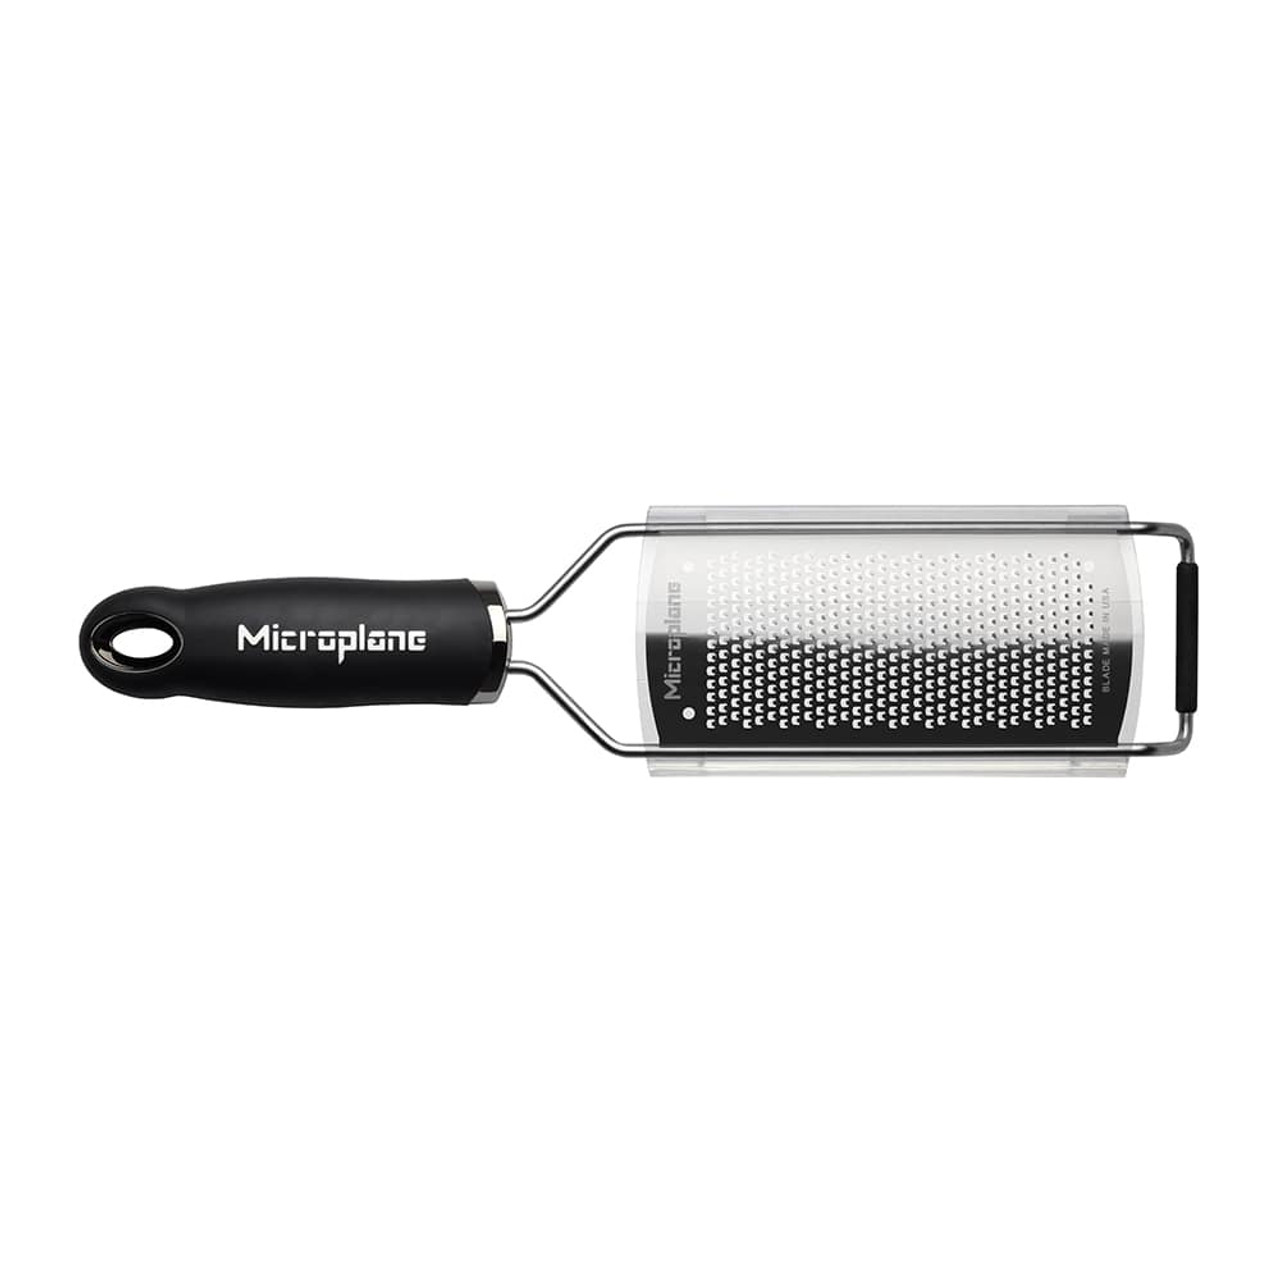 https://cdn11.bigcommerce.com/s-hccytny0od/images/stencil/1280x1280/products/1207/2842/microplane-gourmet-series-fine-grater__05033.1590008570.jpg?c=2?imbypass=on